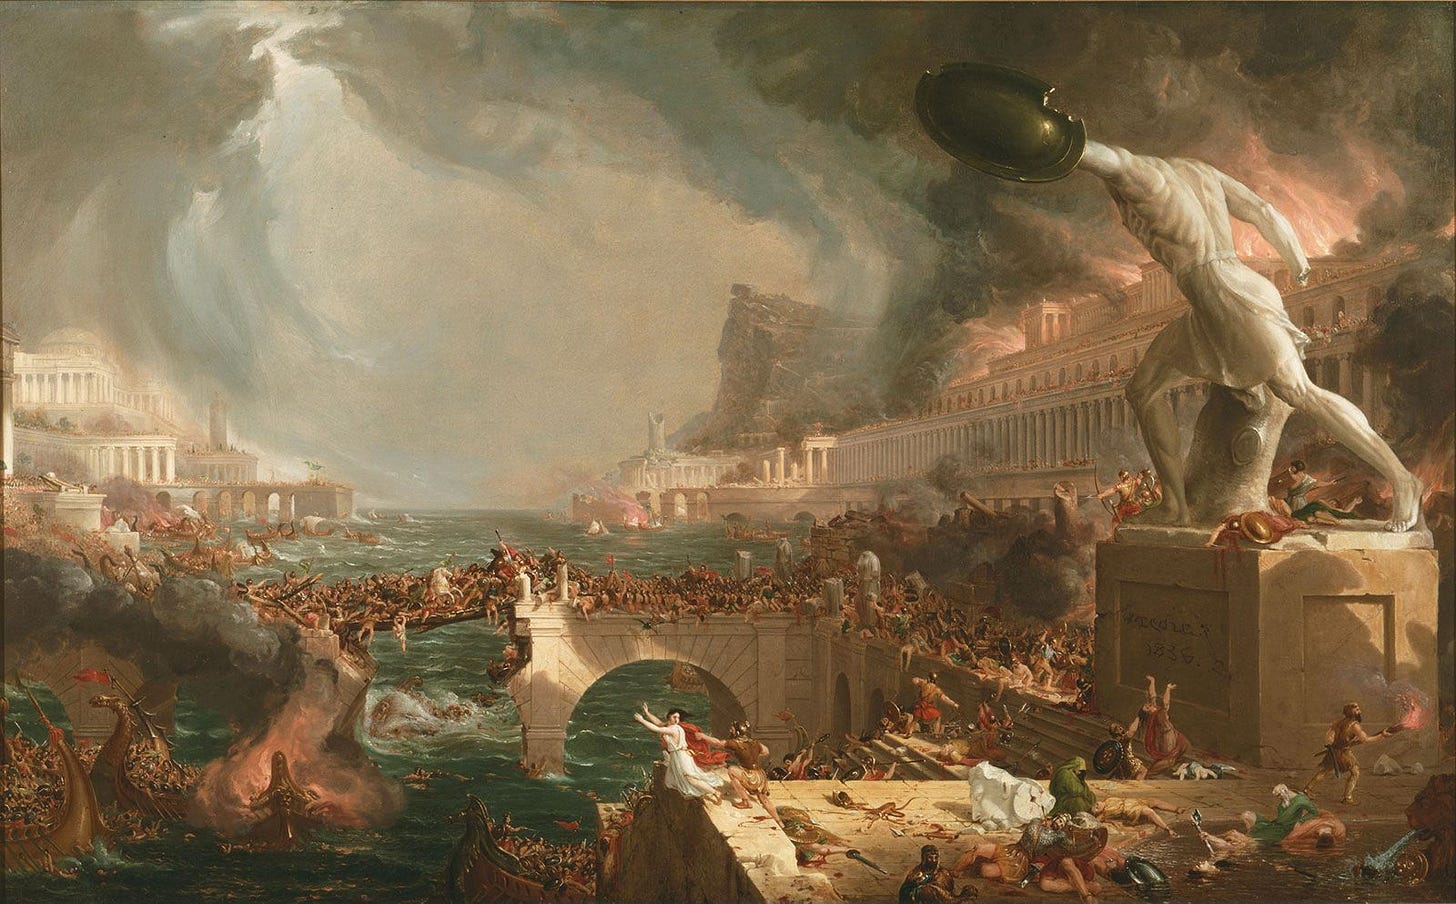 The Course of Empire: Destruction | oil painting by Thomas Cole | Britannica